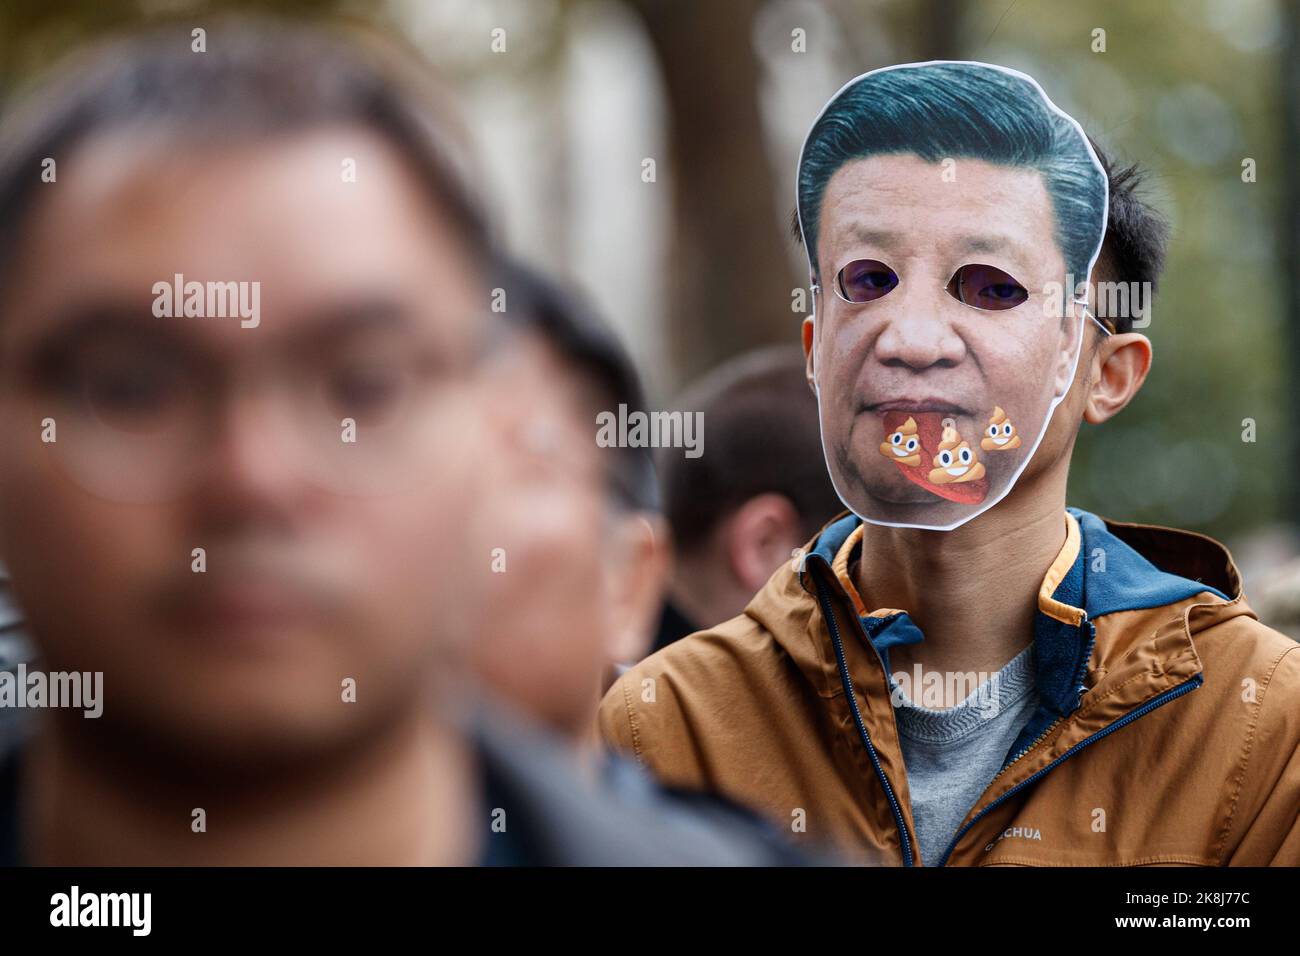 A protester wears Xi Jinping mask during an anti-Chinese Communist Party assembly opposite downing street in London. Hundreds of people marched under a rain storm from Downing Street via Chinatown to the Chinese Embassy in London, to protest against the assault incident in which a Hong Kong protester Bob Chan, who was seen being pulled into the grounds of a Chinese consulate in Manchester and beaten by staff on October 17, 2022. Hundreds of people marched under a rain storm from Downing Street via Chinatown to the Chinese Embassy in London to protest against the assault incident in which a Hon Stock Photo